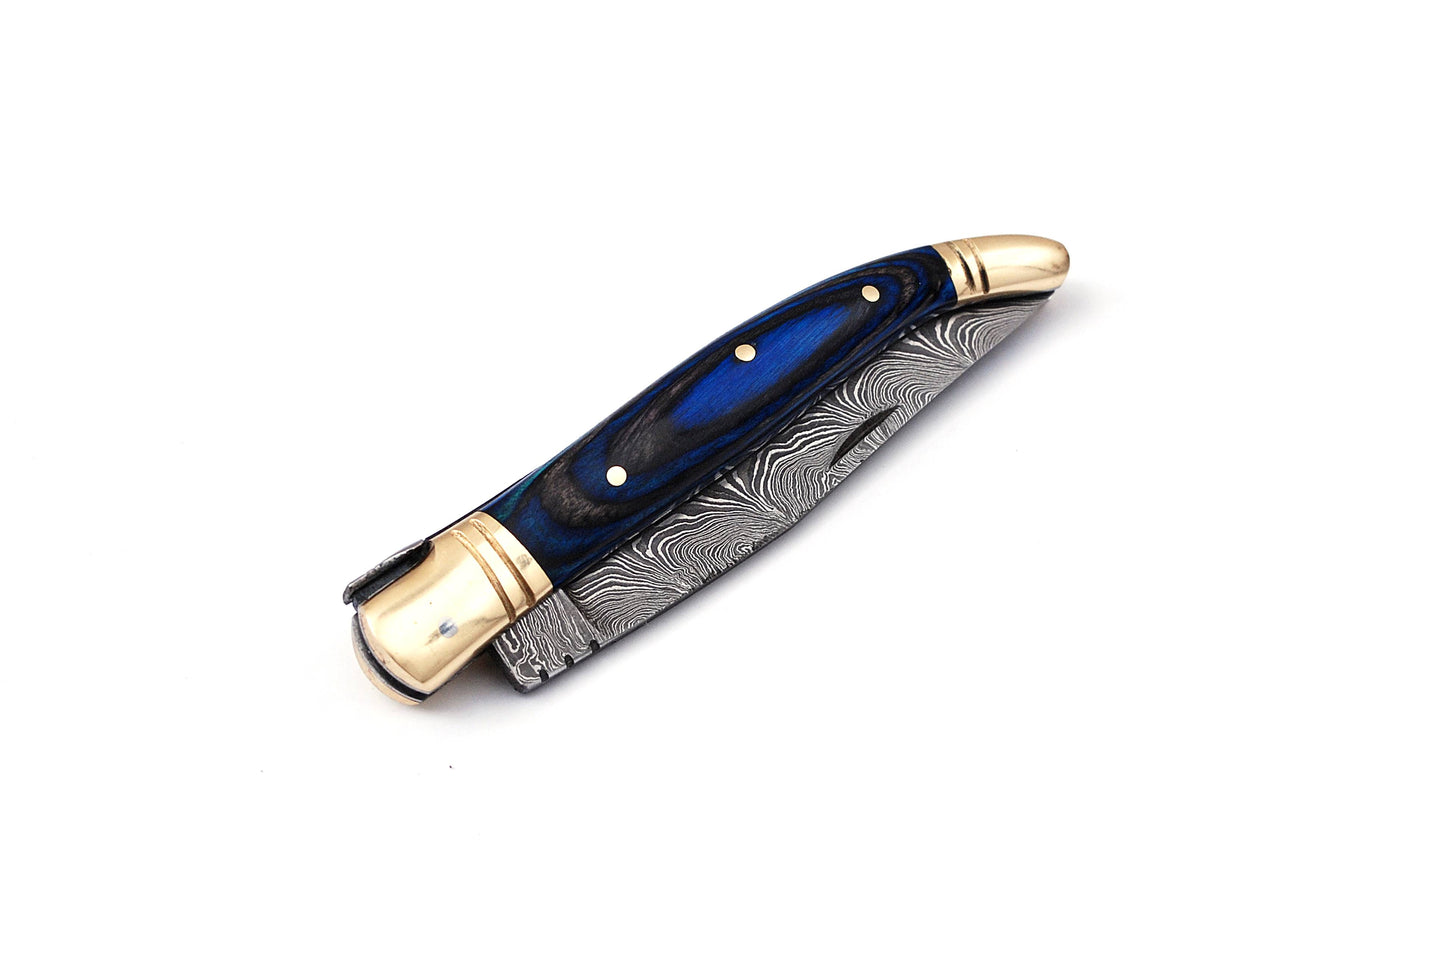 Copy of Laguiole Folding Damascus steel knife, 8.5" Long with 4" hand forged custom twist pattern Blade. 2 tone Blue wood scale with brass bolster, Cow hide leather sheath included